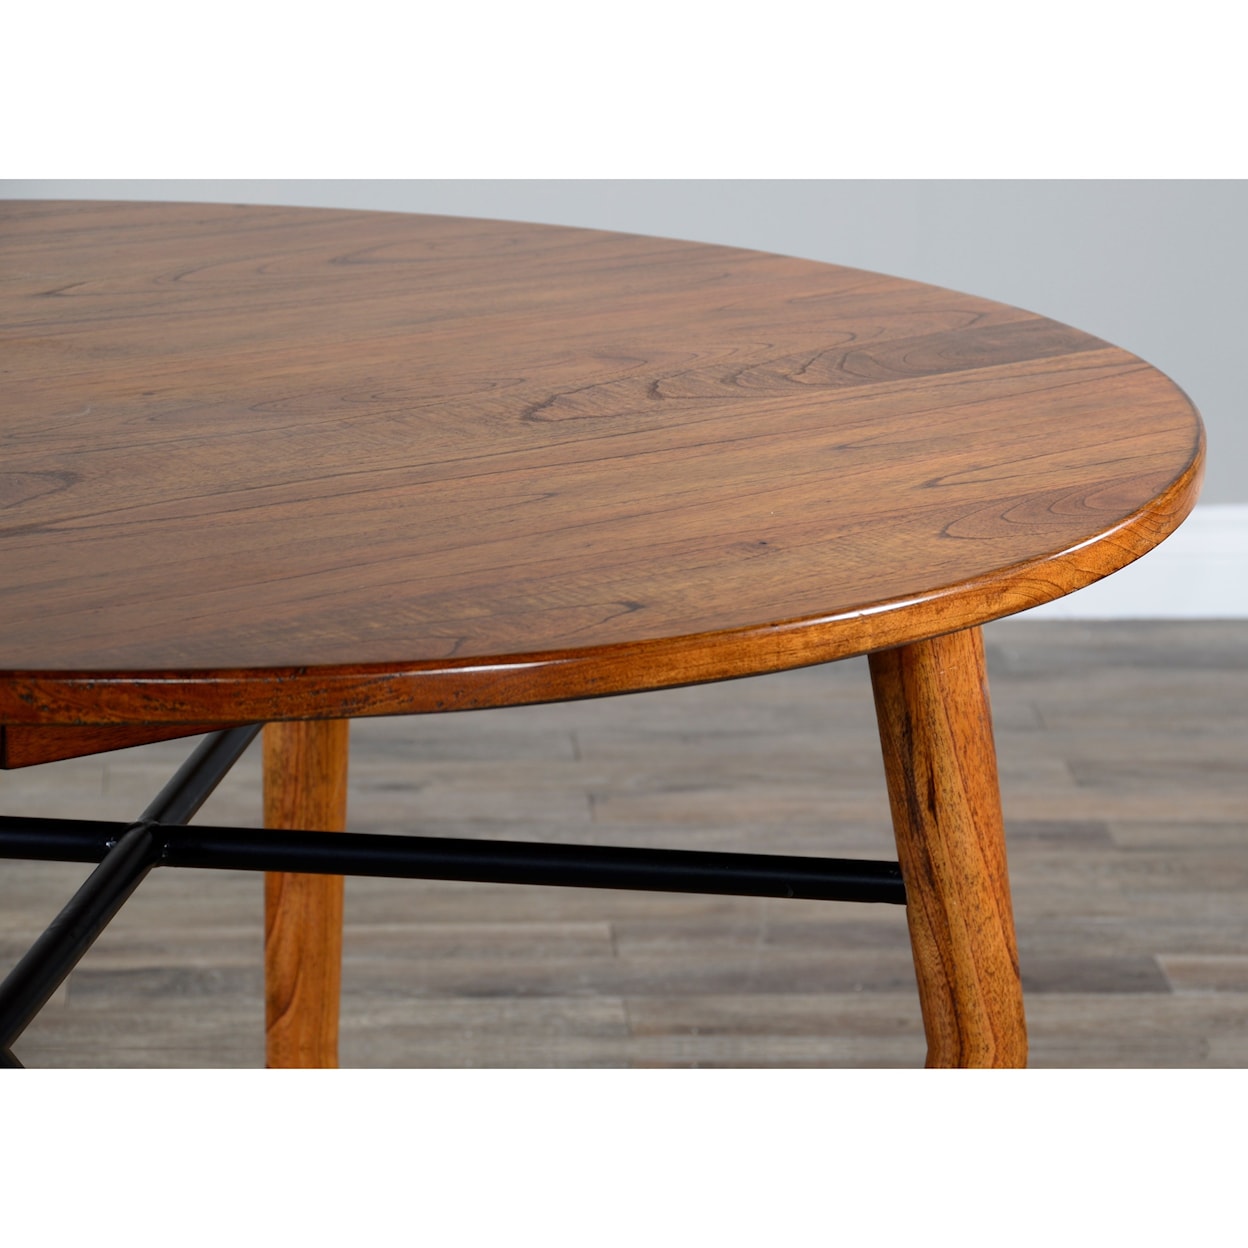 Sunny Designs American Modern Round Table